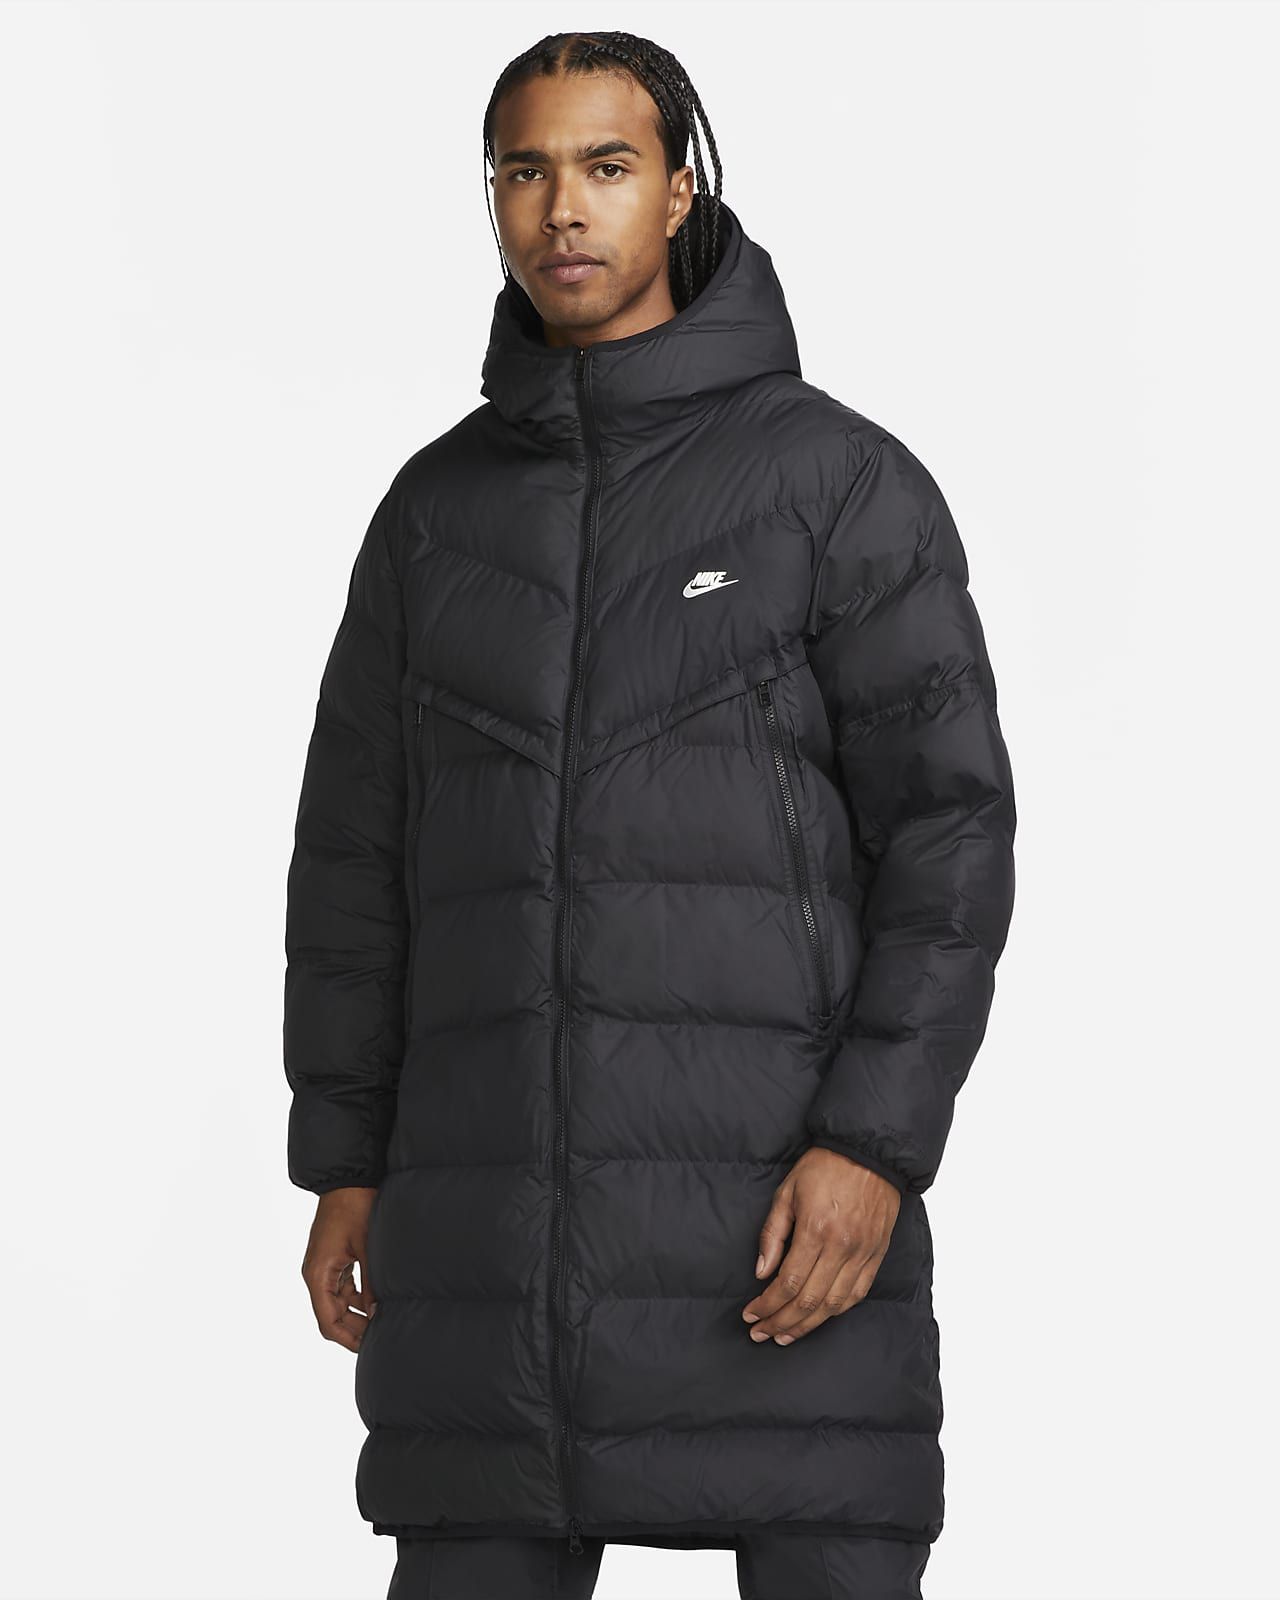 The 15 Coolest Puffer Jackets for Winter